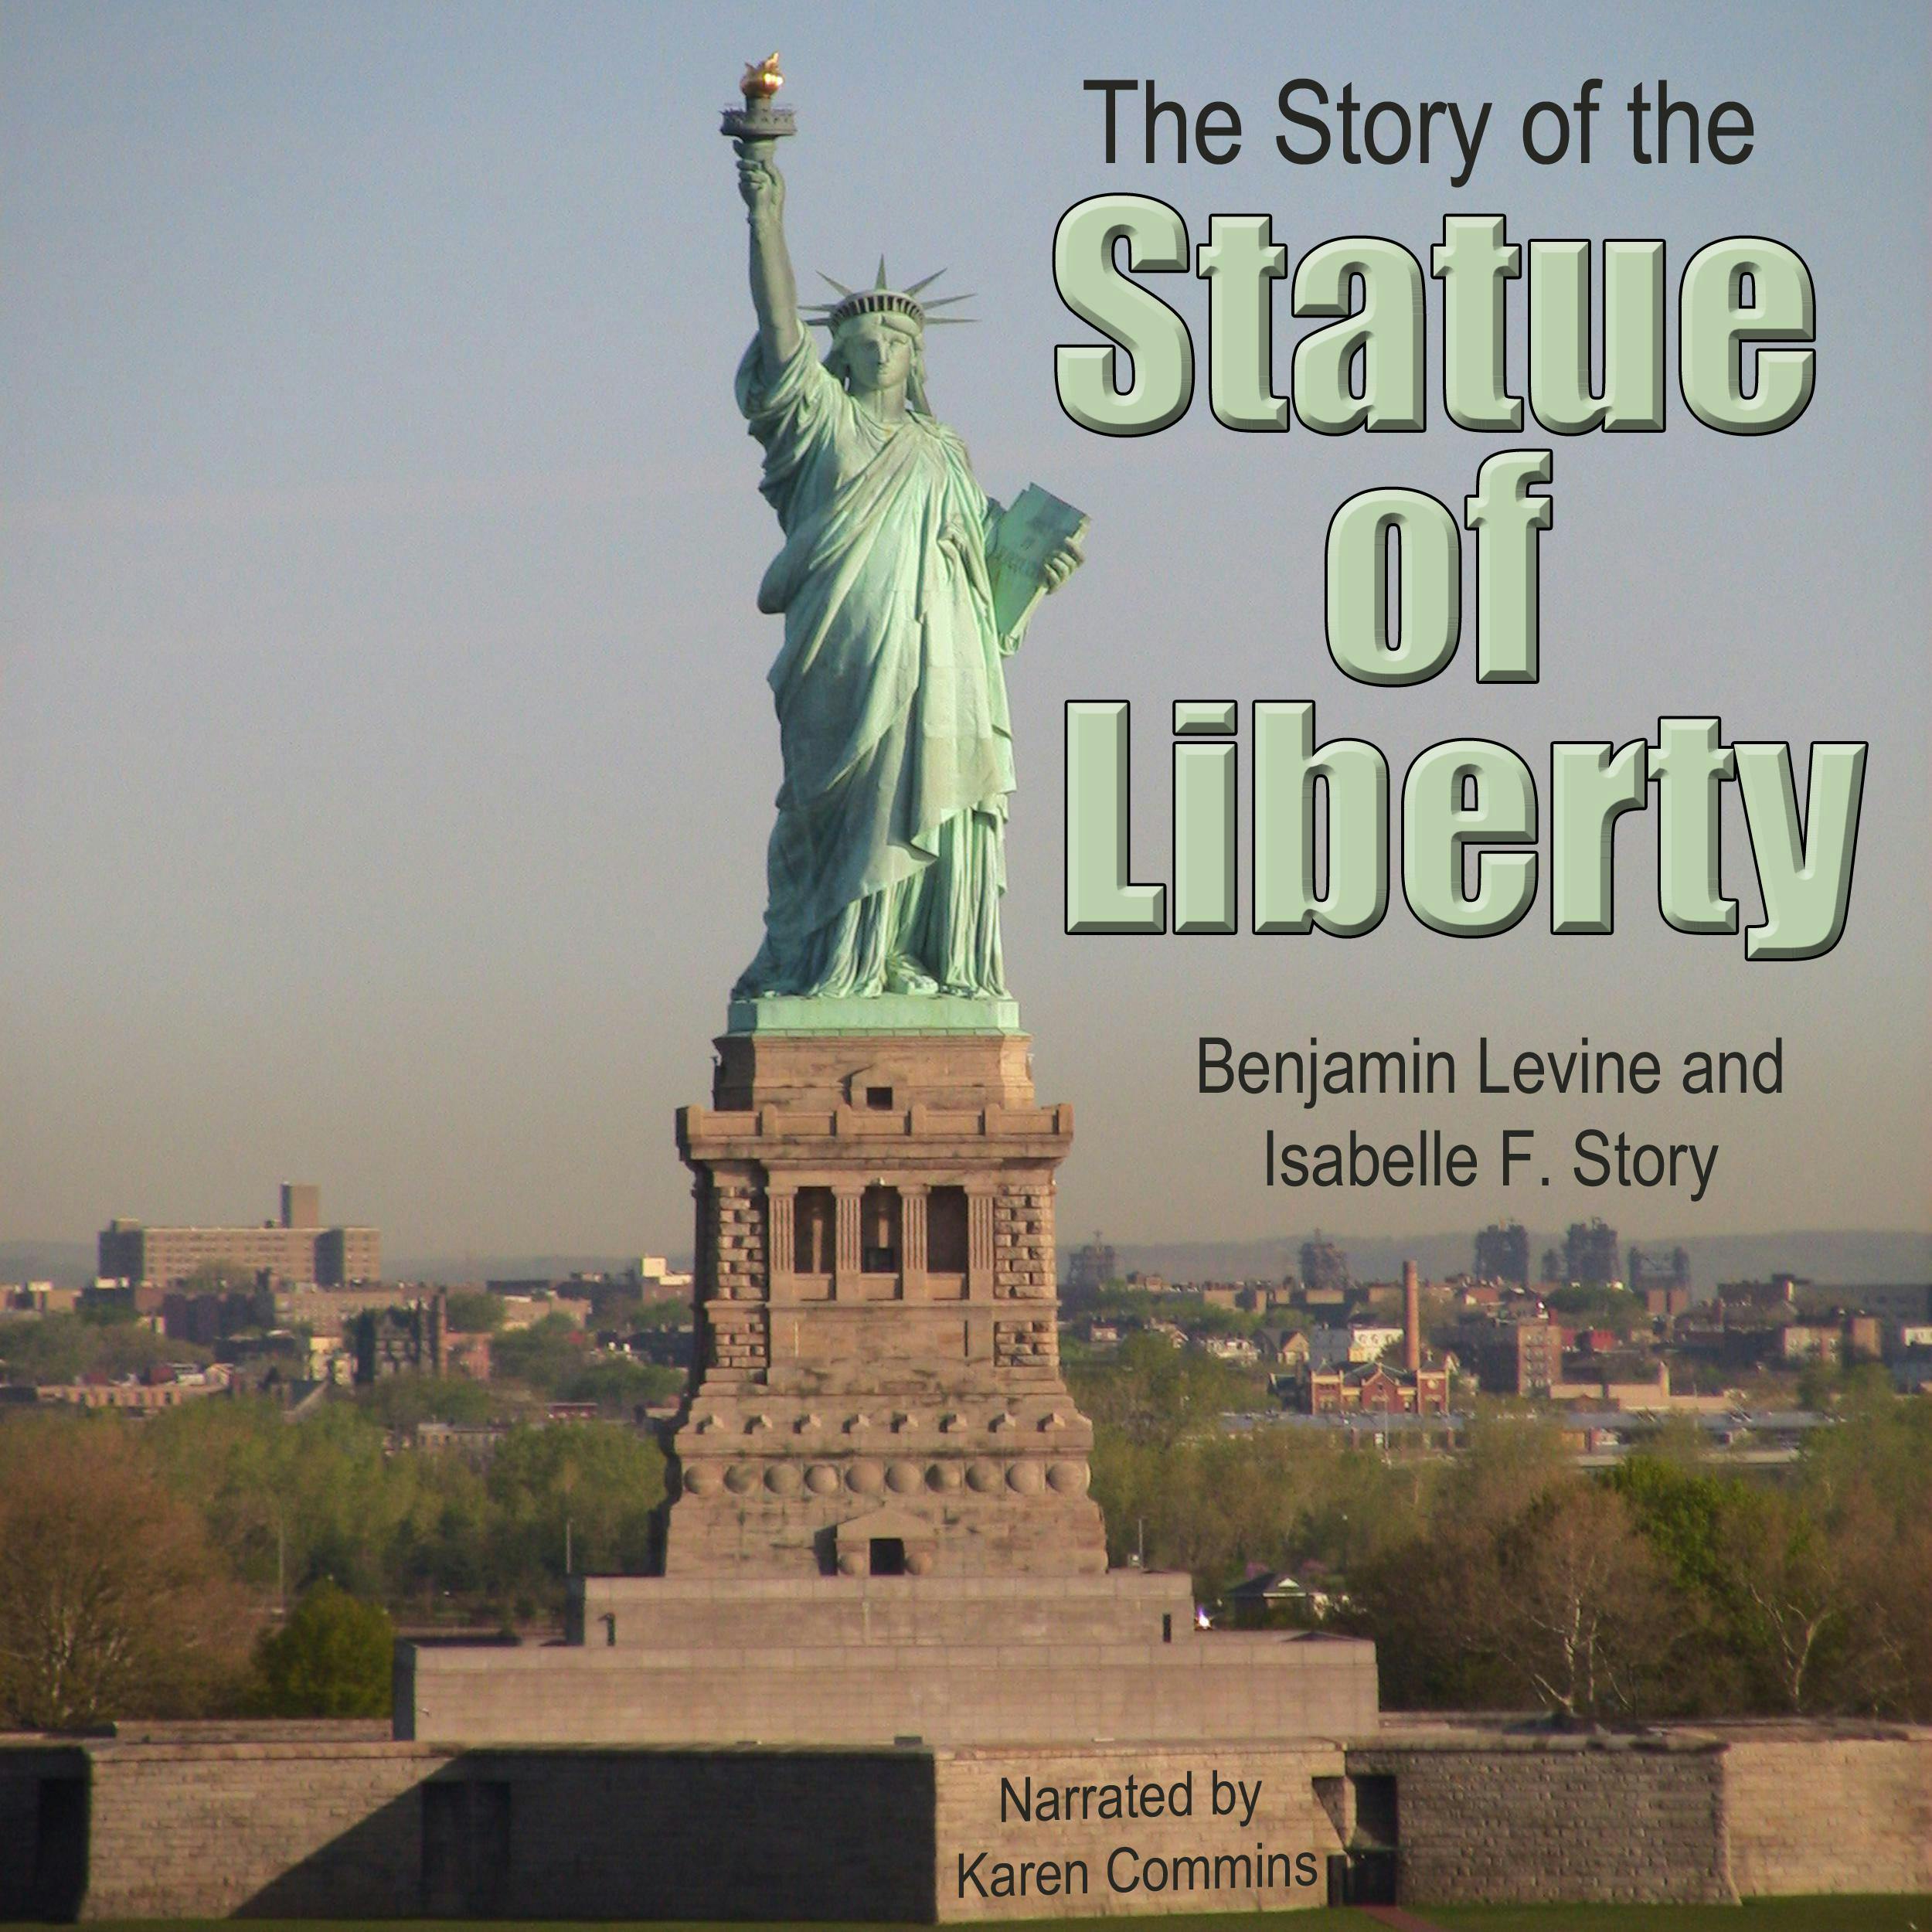 The Story of the Statue of Liberty - Benjamin Levine, Isabelle F. Story